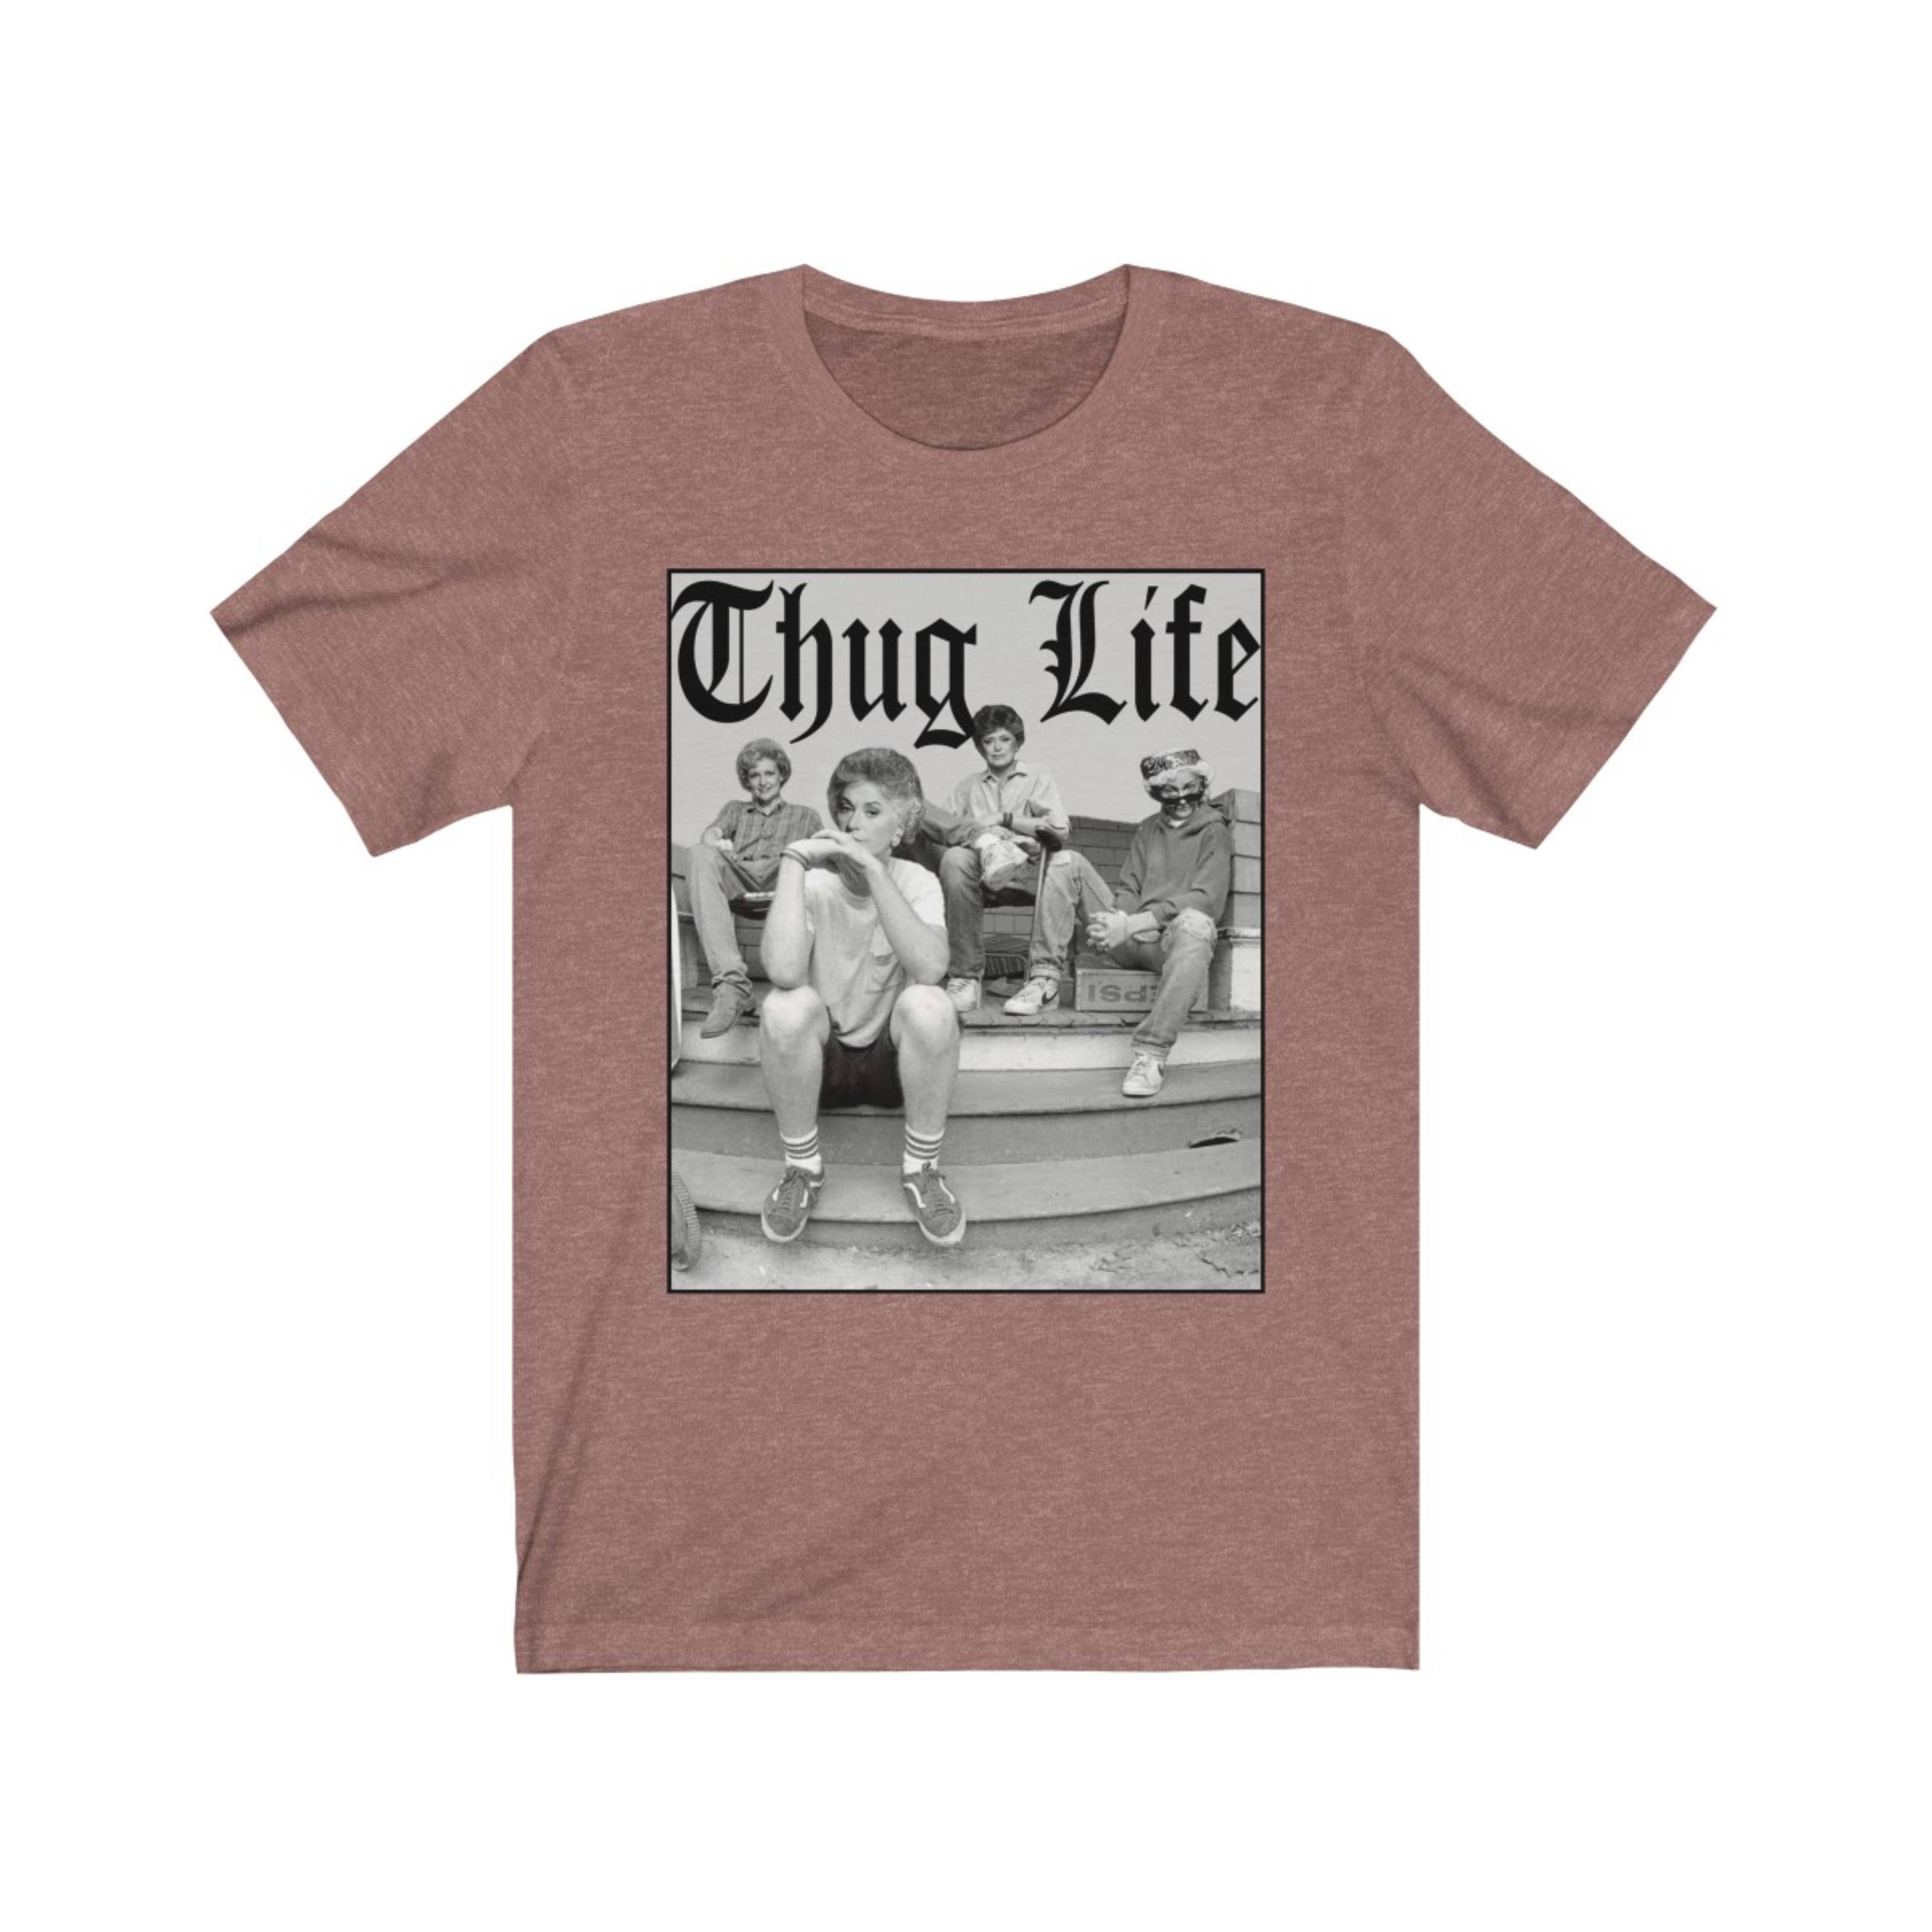 The Golden Girls Thug Life Shirt Shirt for Fans Birthday picture